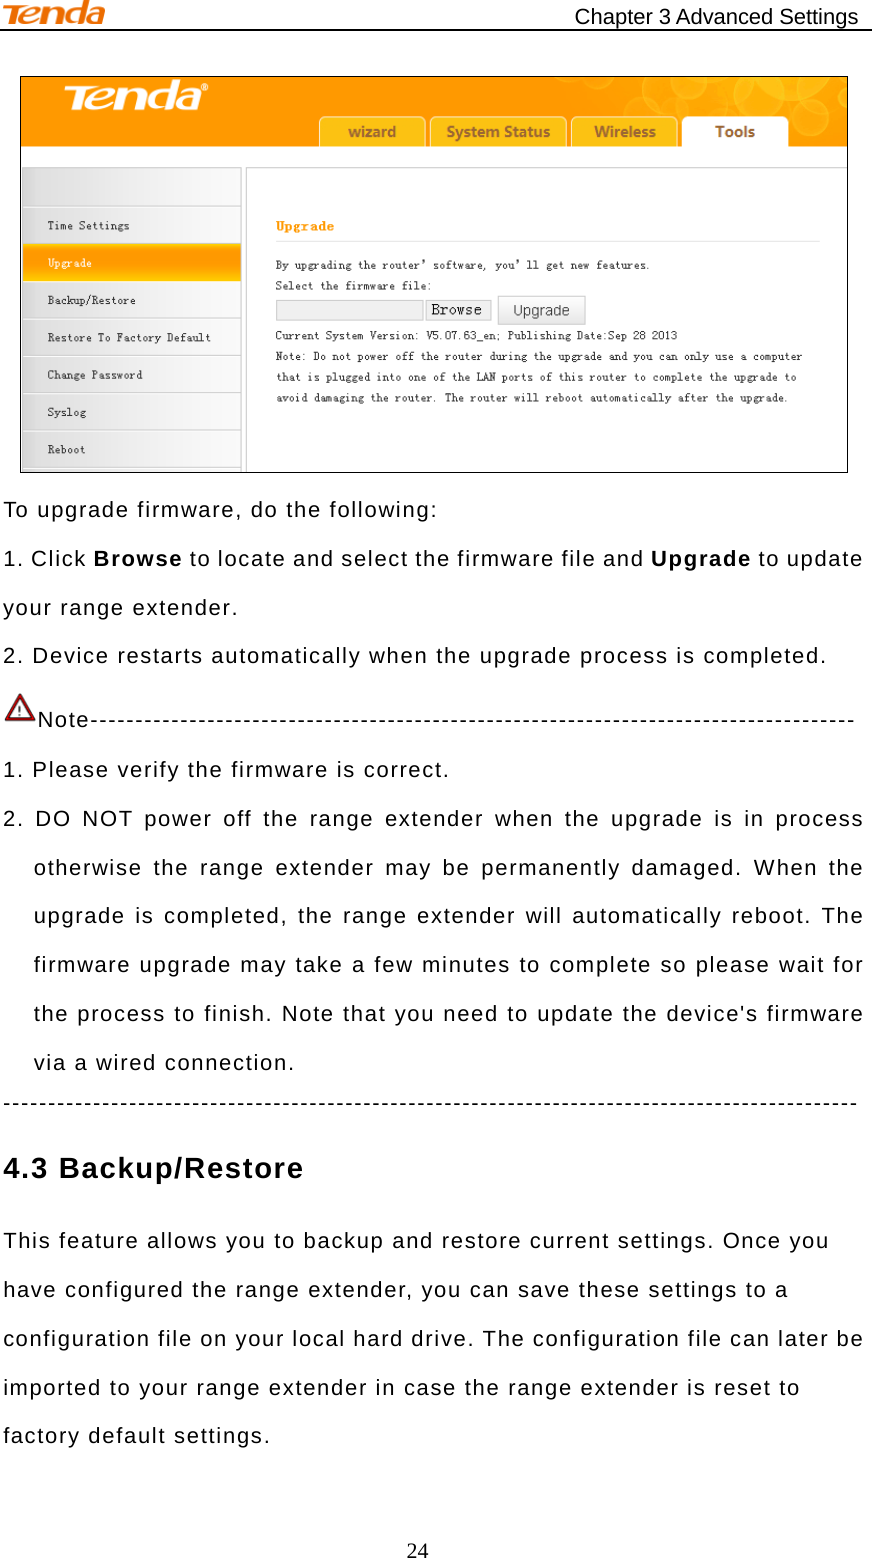                                            Chapter 3 Advanced Settings 24  To upgrade firmware, do the following: 1. Click Browse to locate and select the firmware file and Upgrade to update your range extender. 2. Device restarts automatically when the upgrade process is completed. Note-------------------------------------------------------------------------------------   1. Please verify the firmware is correct. 2. DO NOT power off the range extender when the upgrade is in process otherwise the range extender may be permanently damaged. When the upgrade is completed, the range extender will automatically reboot. The firmware upgrade may take a few minutes to complete so please wait for the process to finish. Note that you need to update the device&apos;s firmware via a wired connection. ----------------------------------------------------------------------------------------------- 4.3 Backup/Restore This feature allows you to backup and restore current settings. Once you have configured the range extender, you can save these settings to a configuration file on your local hard drive. The configuration file can later be imported to your range extender in case the range extender is reset to factory default settings. 